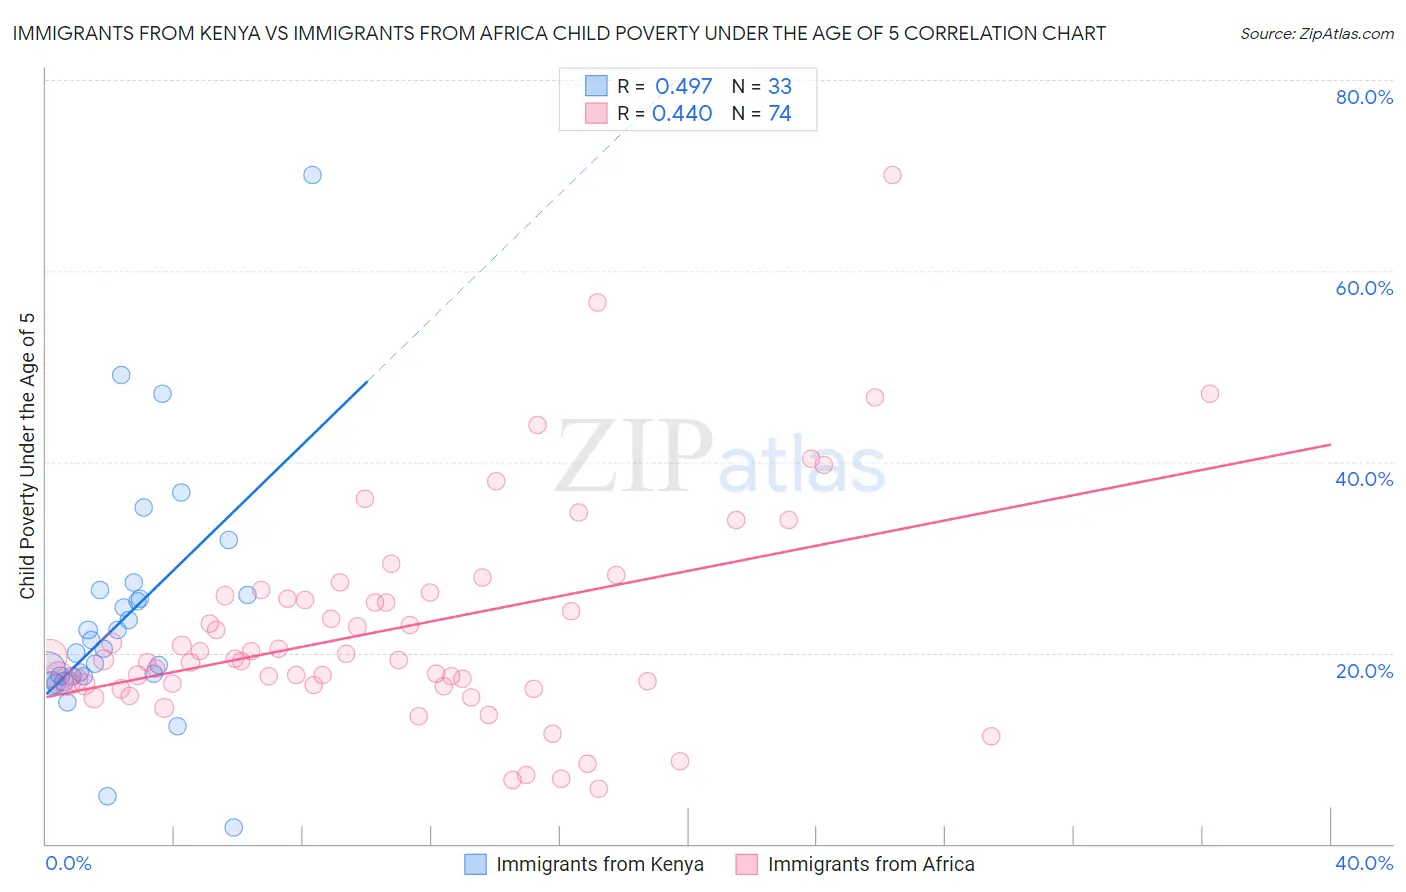 Immigrants from Kenya vs Immigrants from Africa Child Poverty Under the Age of 5